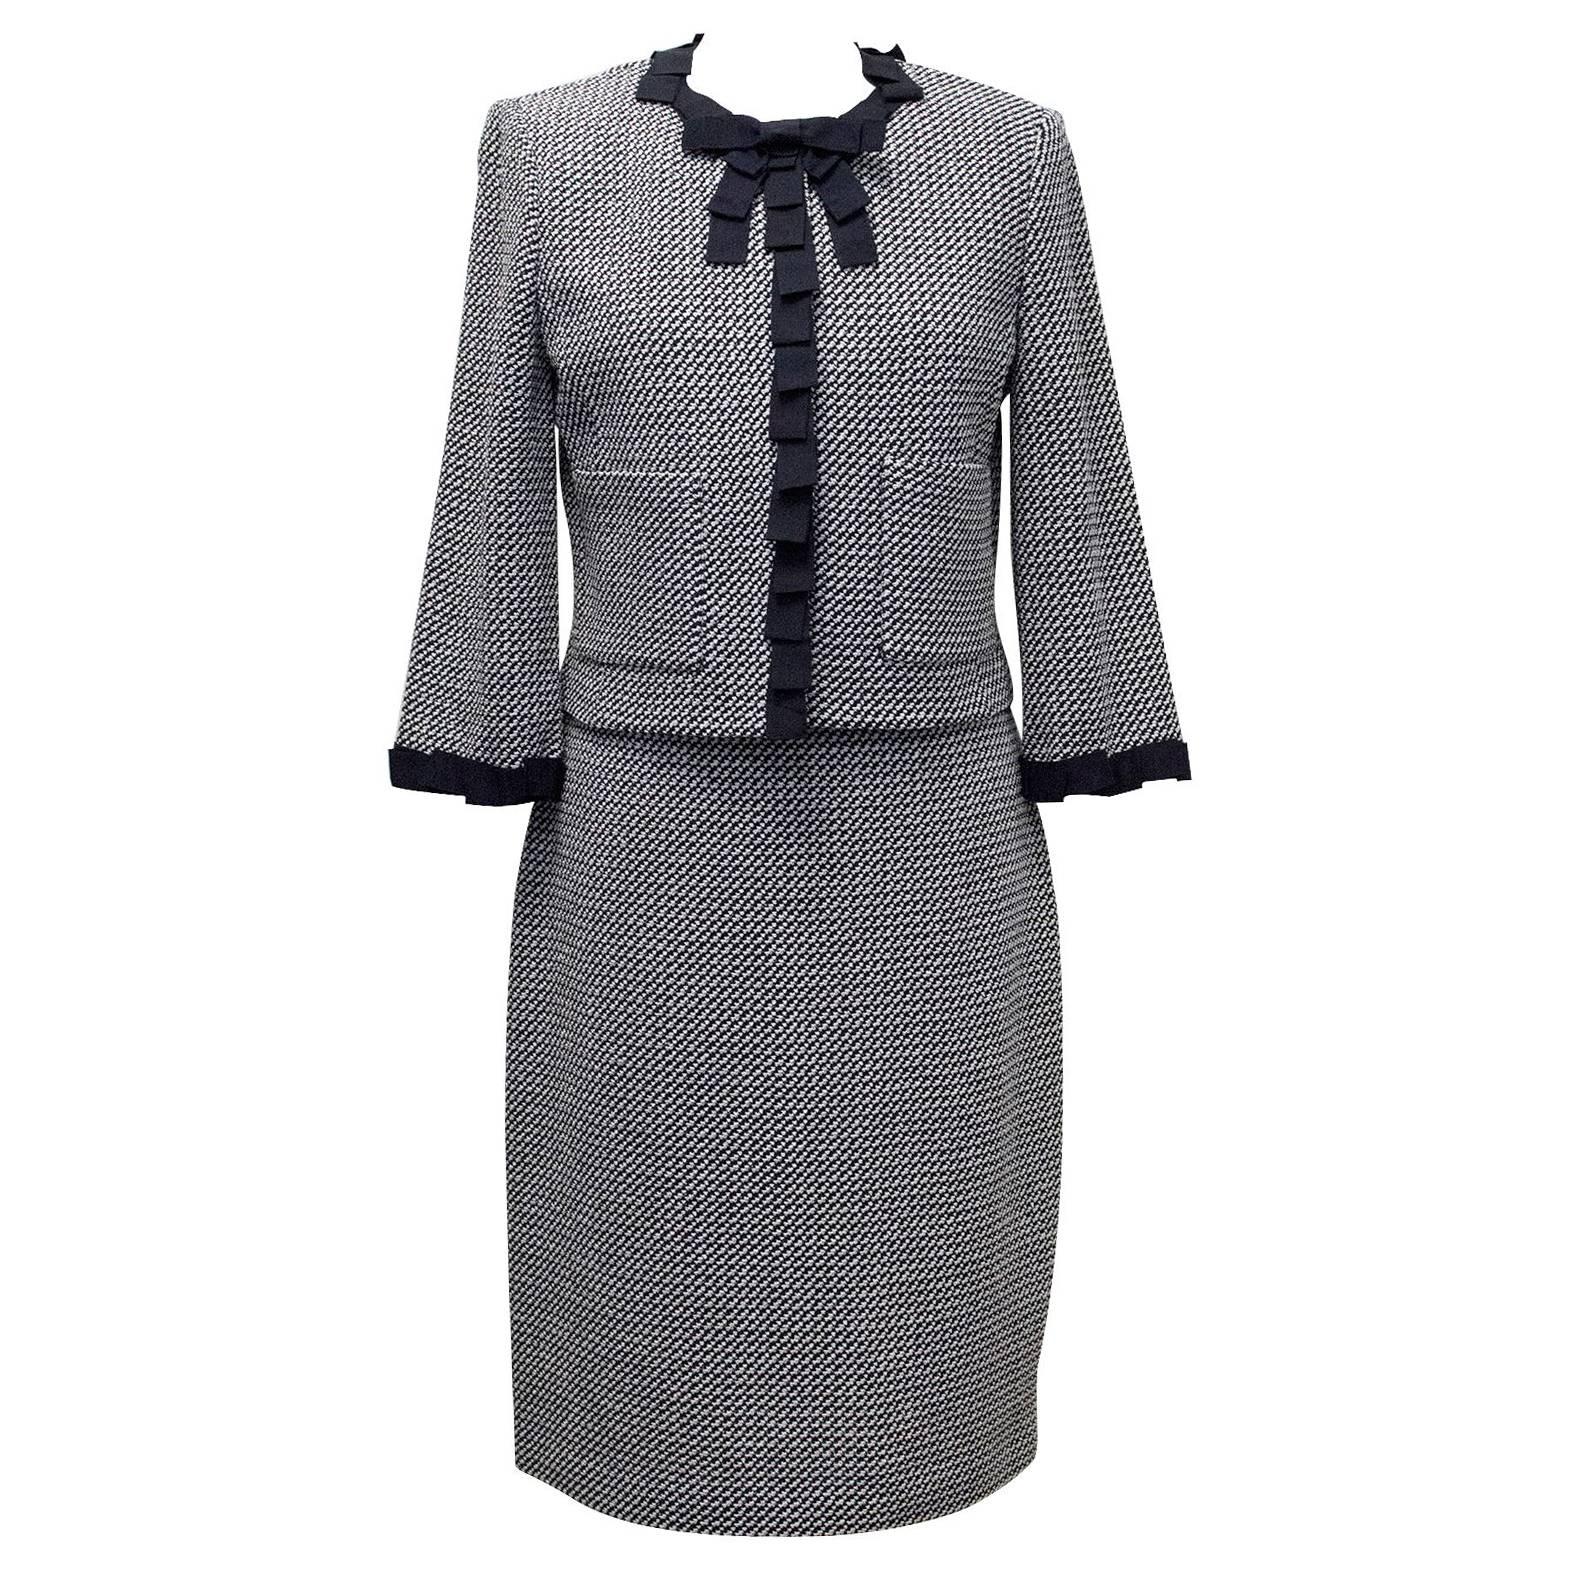 St. John Houndstooth Navy & White Dress and Jacket For Sale